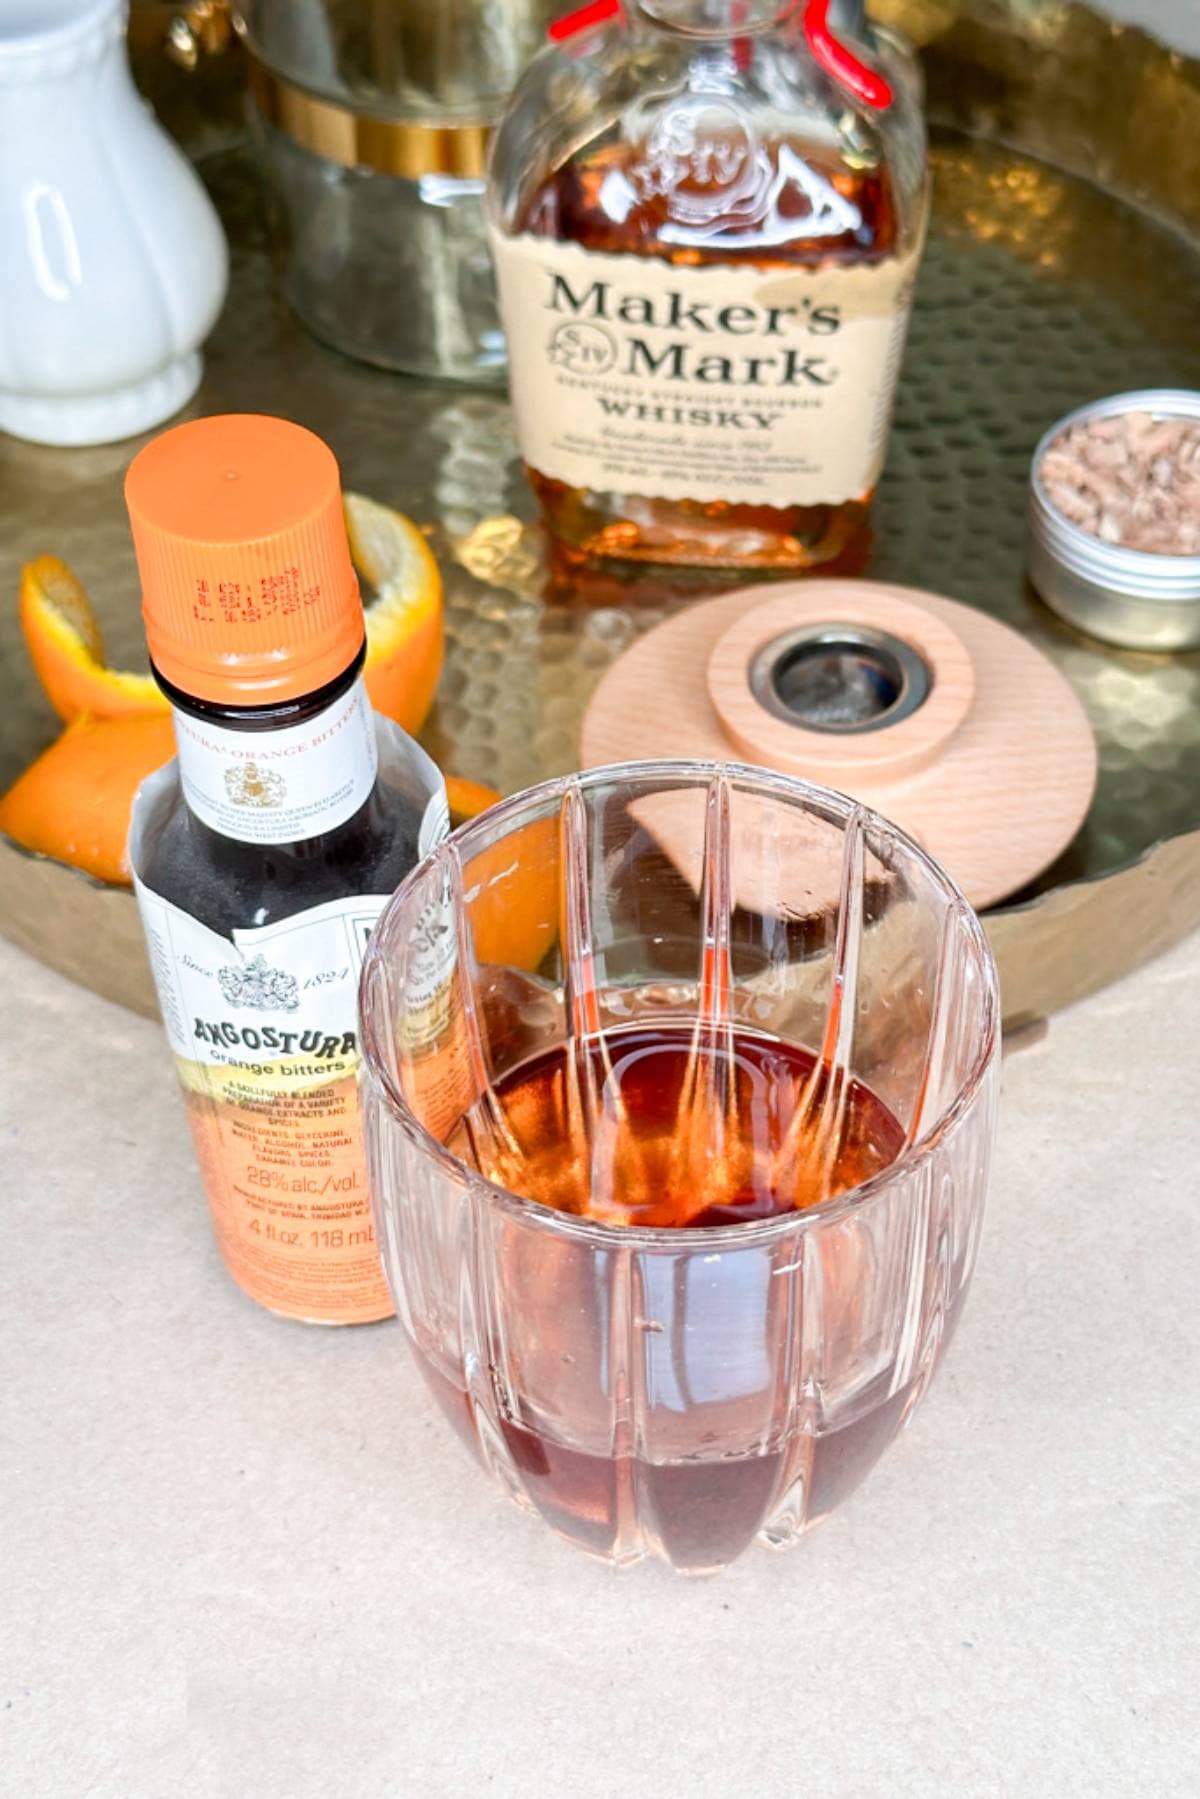 Adding bitters to an old-fashioned cocktail